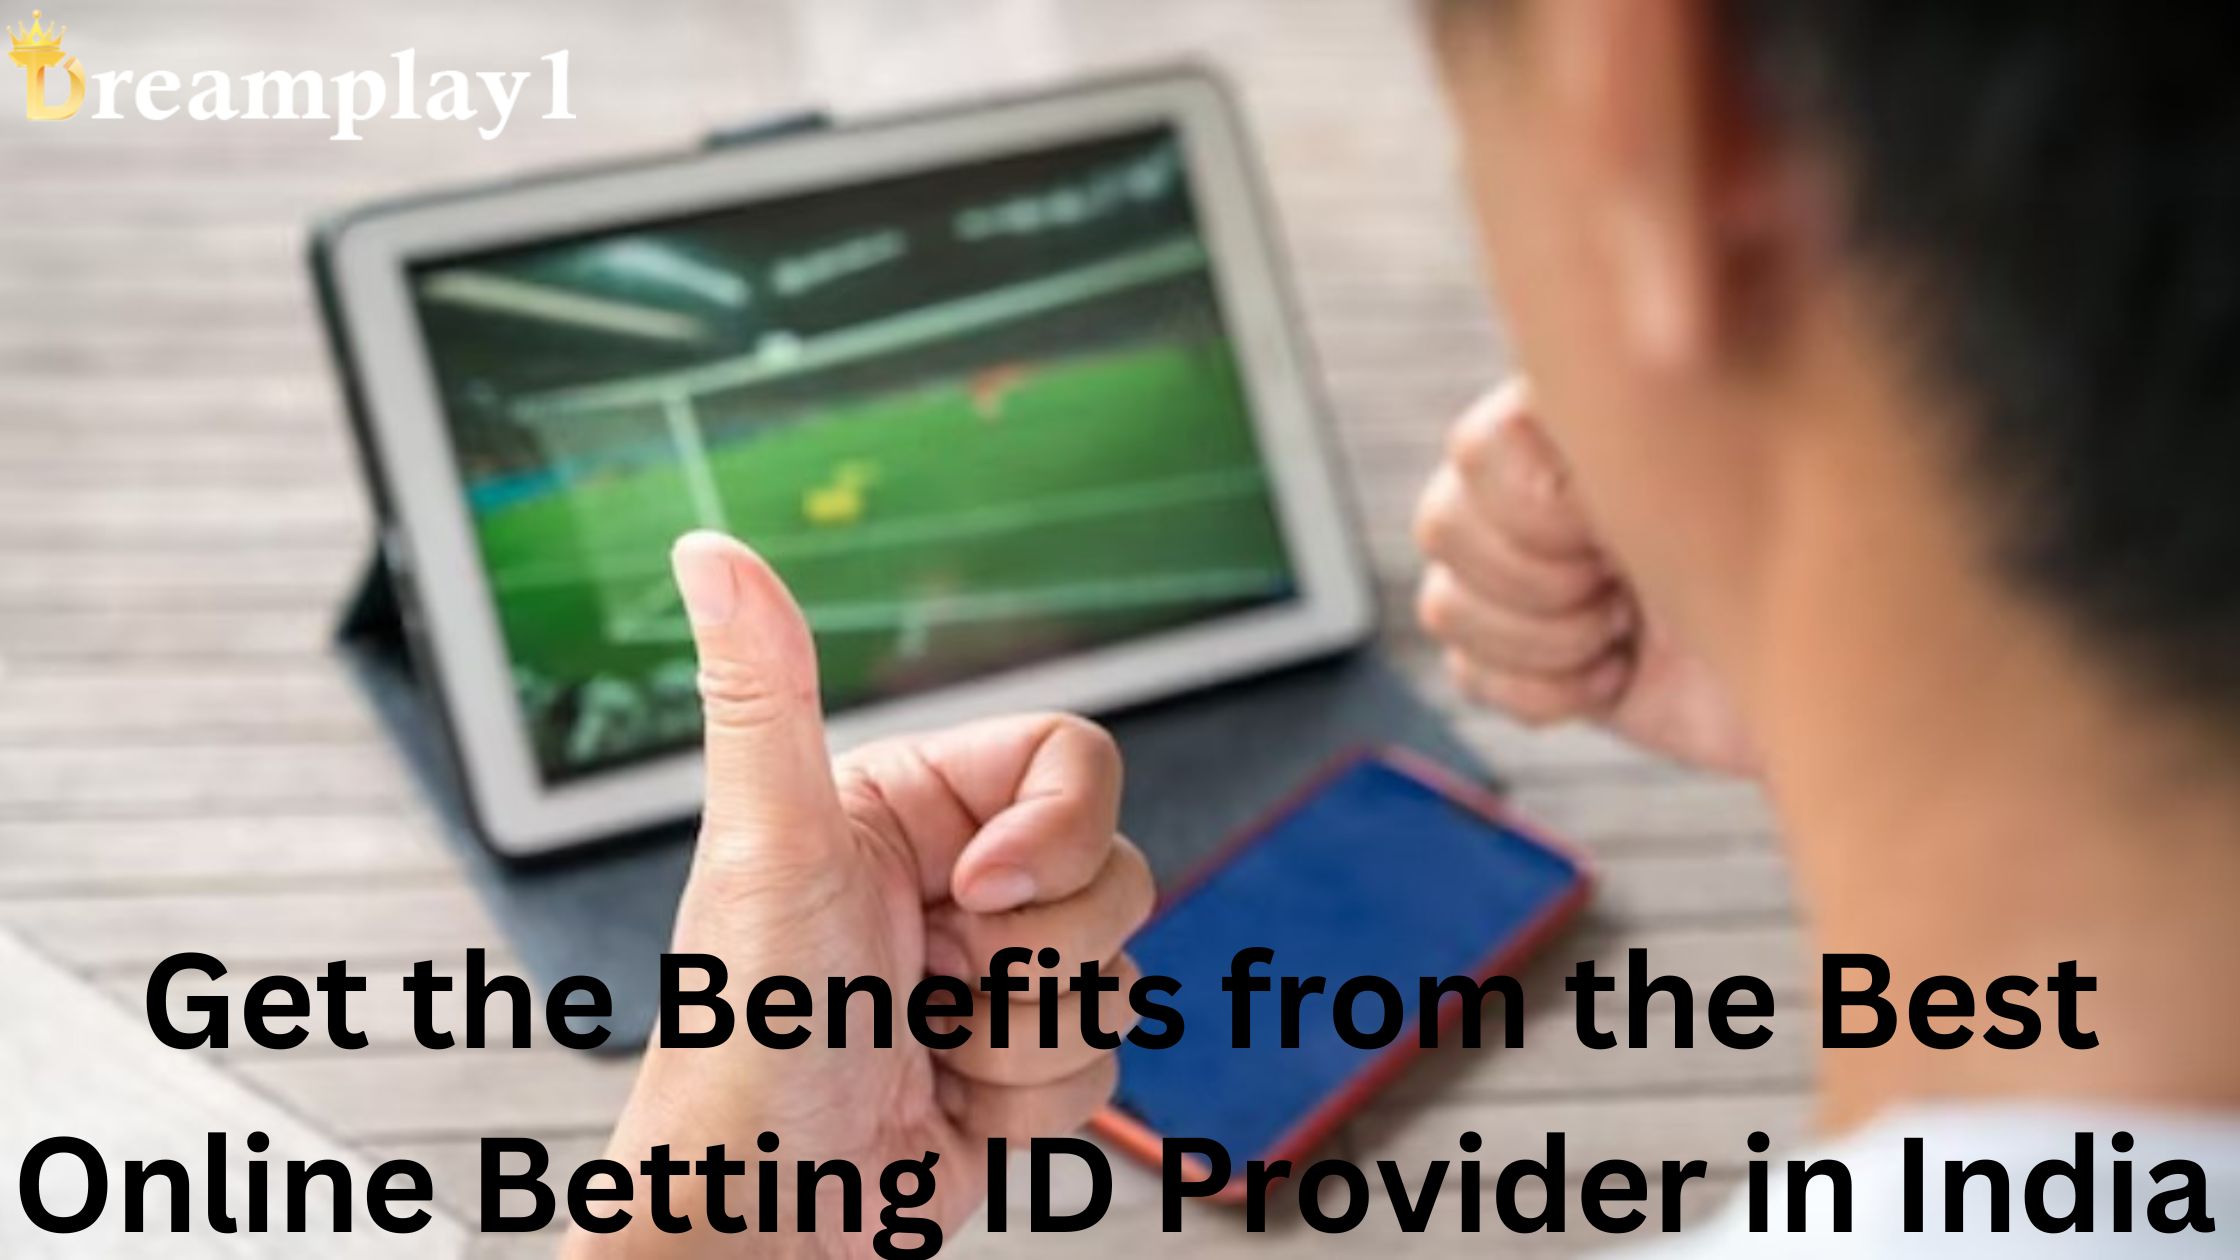 Best Online Betting ID Provider in India